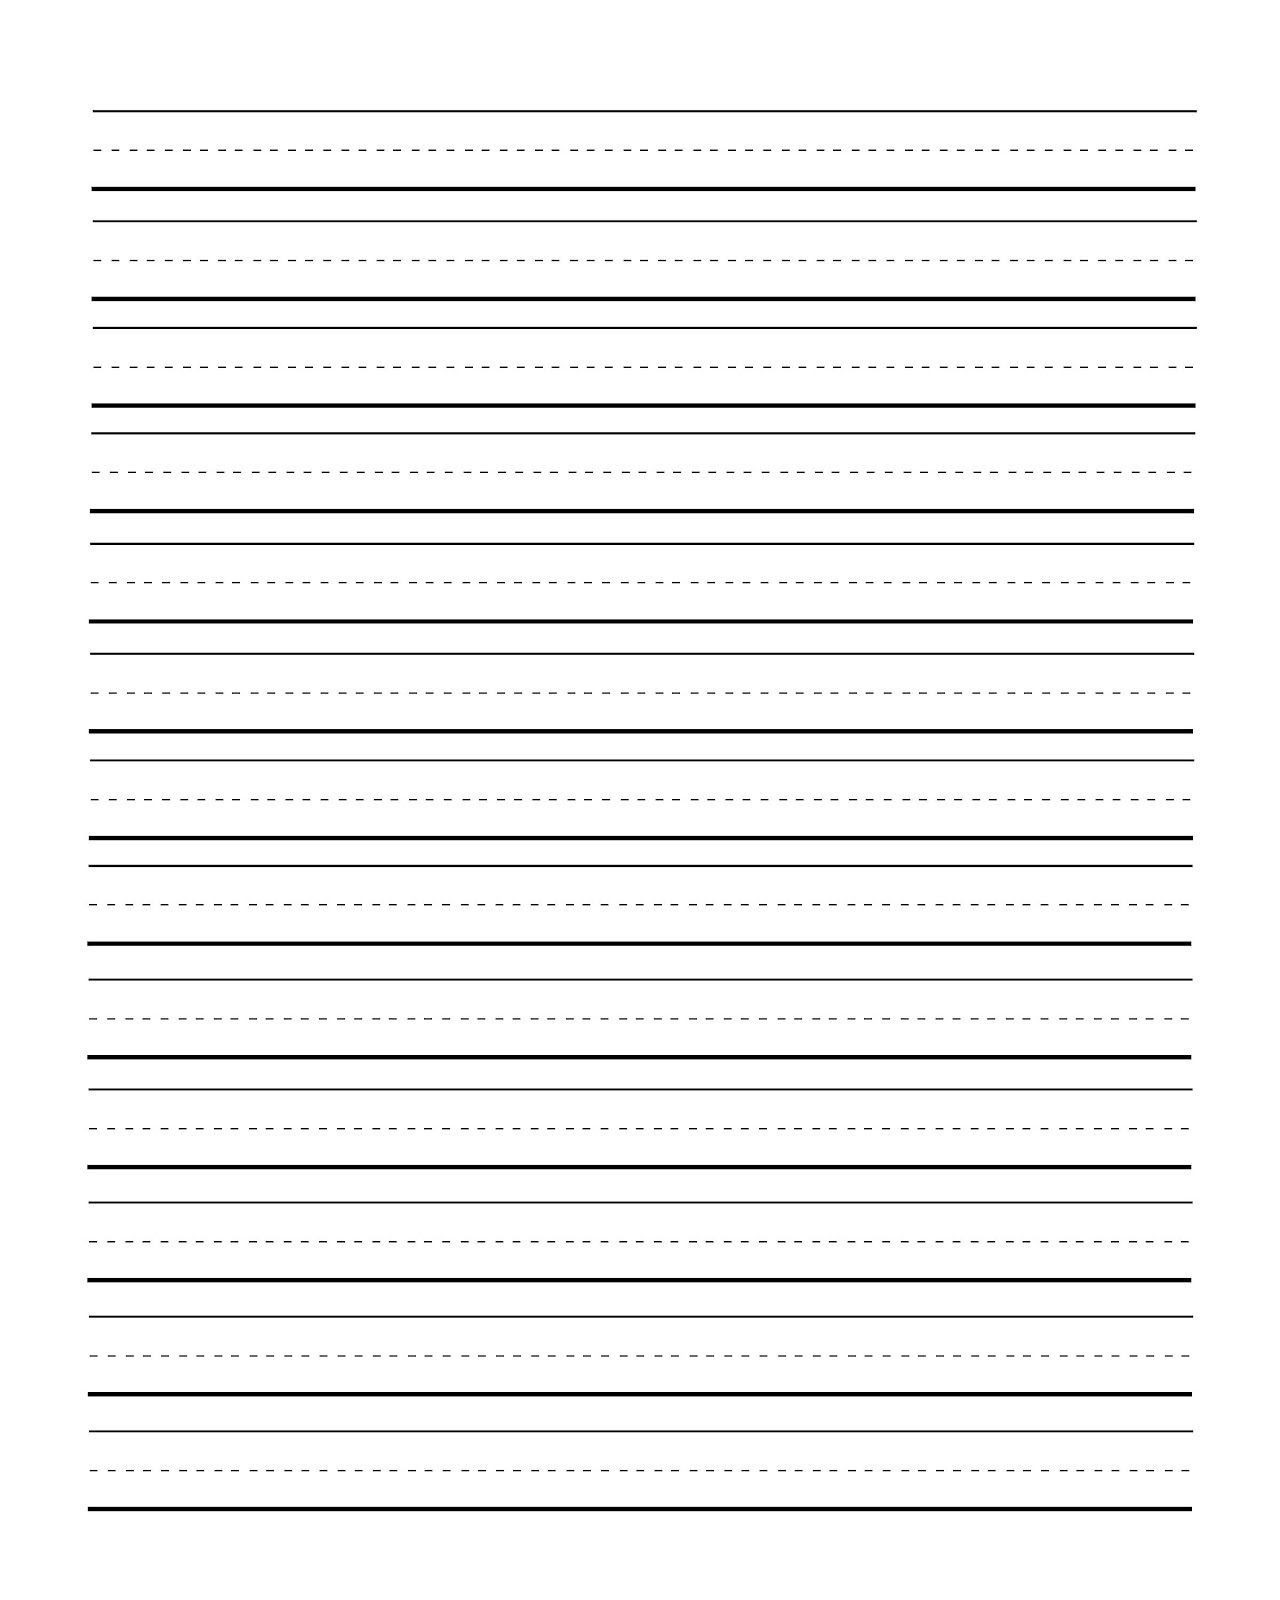 Elementary Lined Paper Printable Free Free Printable